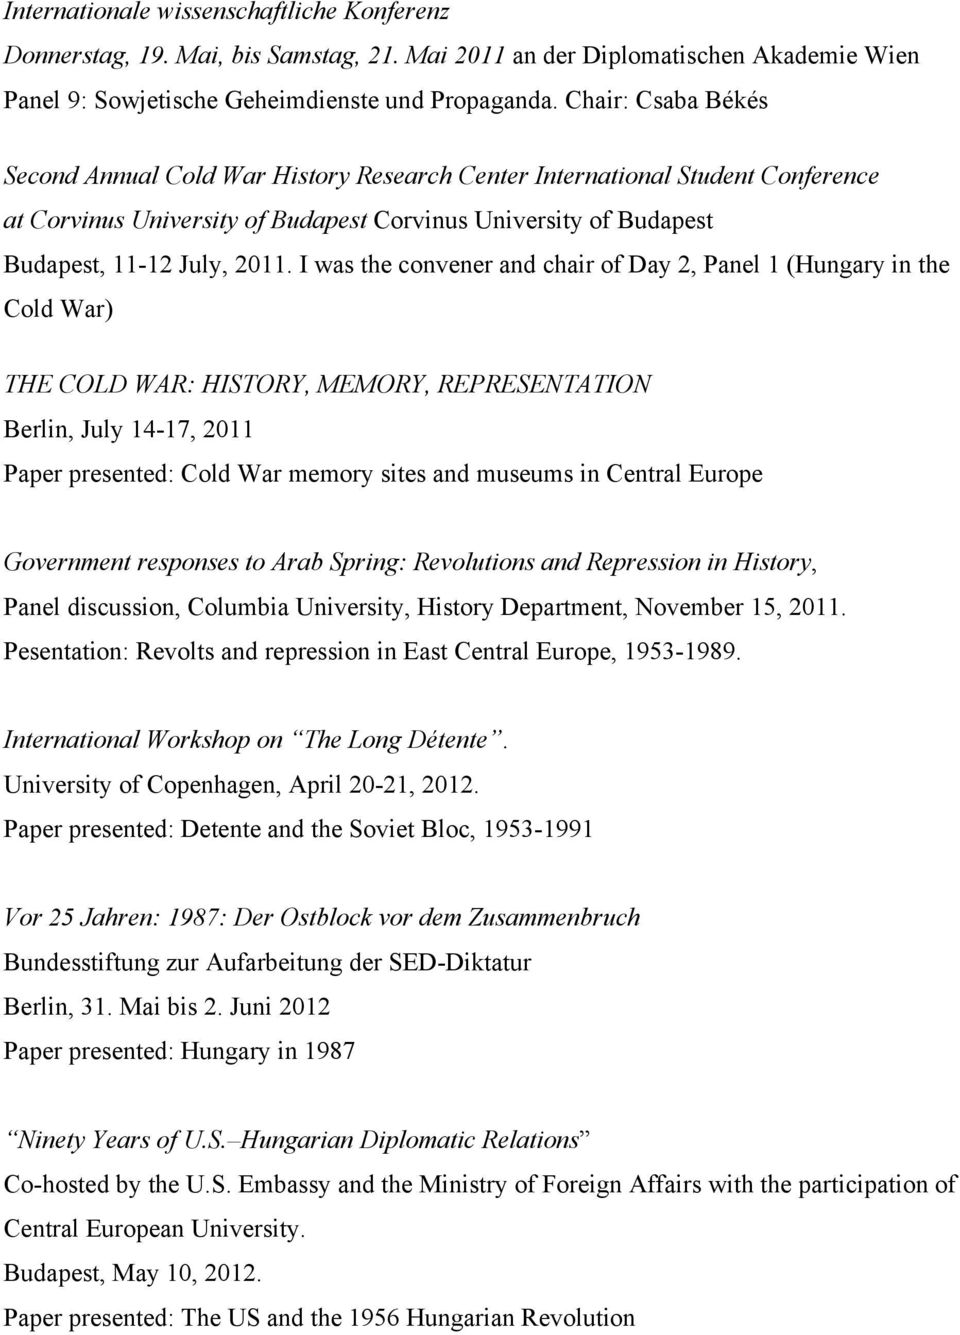 I was the convener and chair of Day 2, Panel 1 (Hungary in the Cold War) THE COLD WAR: HISTORY, MEMORY, REPRESENTATION Berlin, July 14-17, 2011 Paper presented: Cold War memory sites and museums in